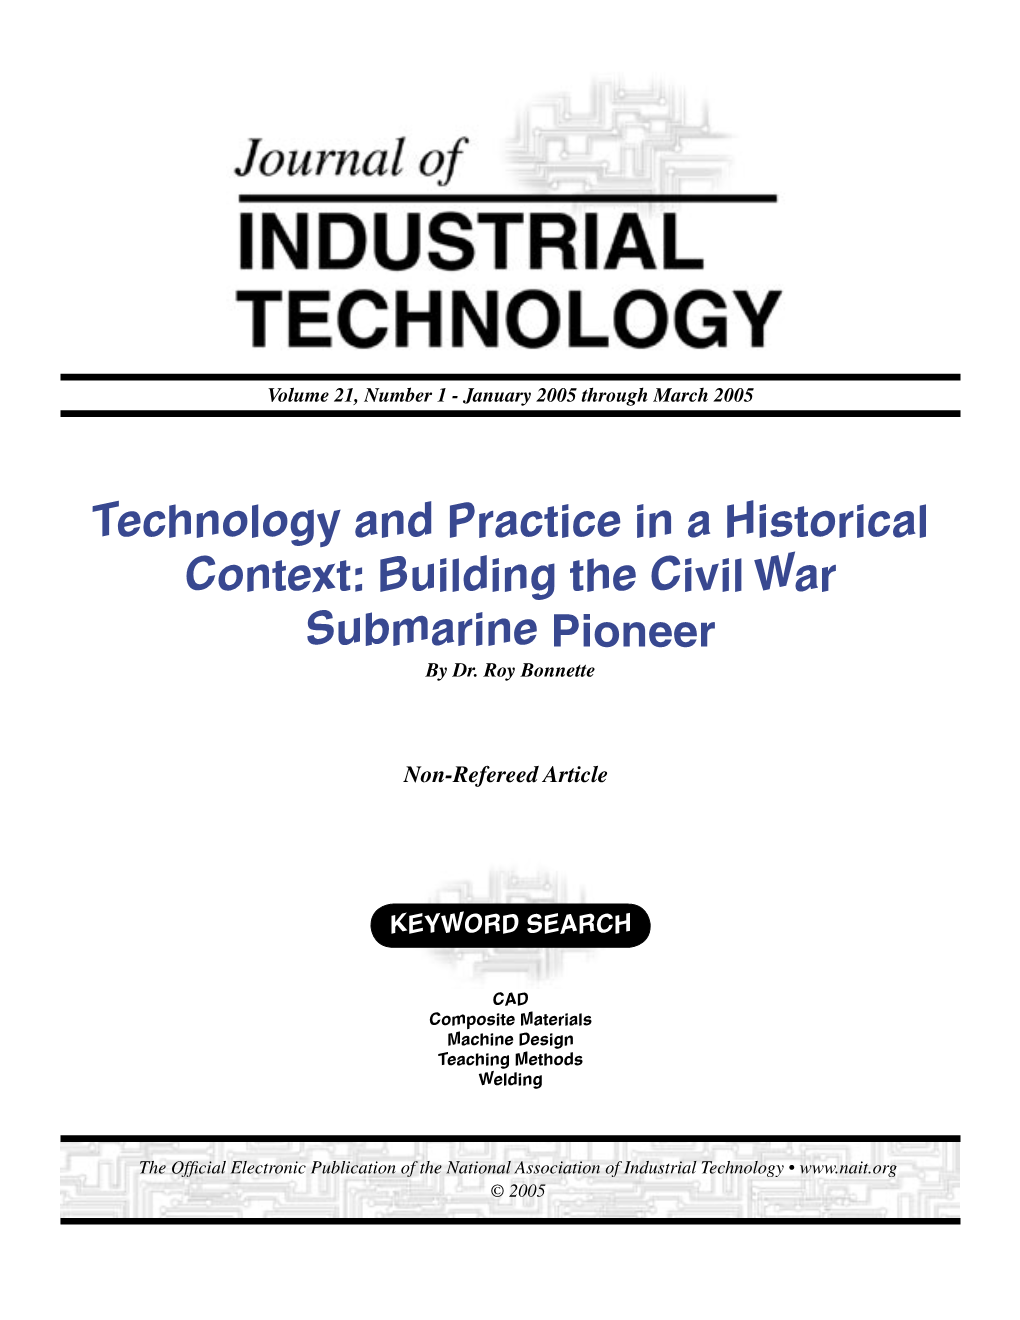 Technology and Practice in a Historical Context: Building the Civil War Submarine Pioneer by Dr